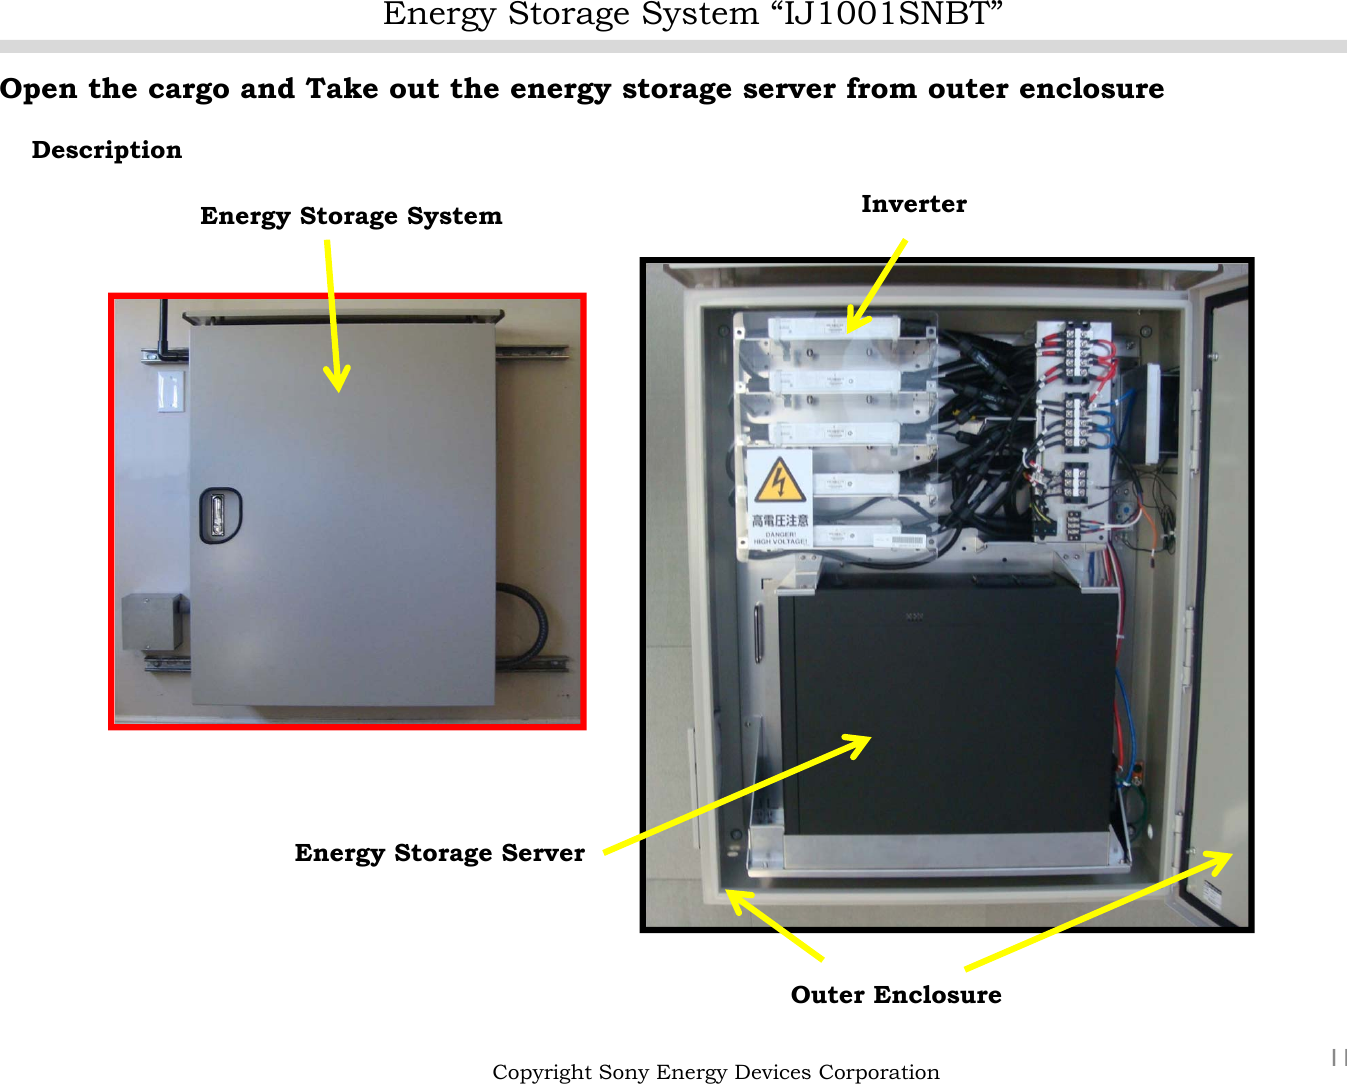 Energy Storage System “IJ1001SNBT”11Open the cargo and Take out the energy storage server from outer enclosureDescriptionCopyright Sony Energy Devices CorporationEnergy Storage SystemEnergy Storage ServerOuter EnclosureInverter